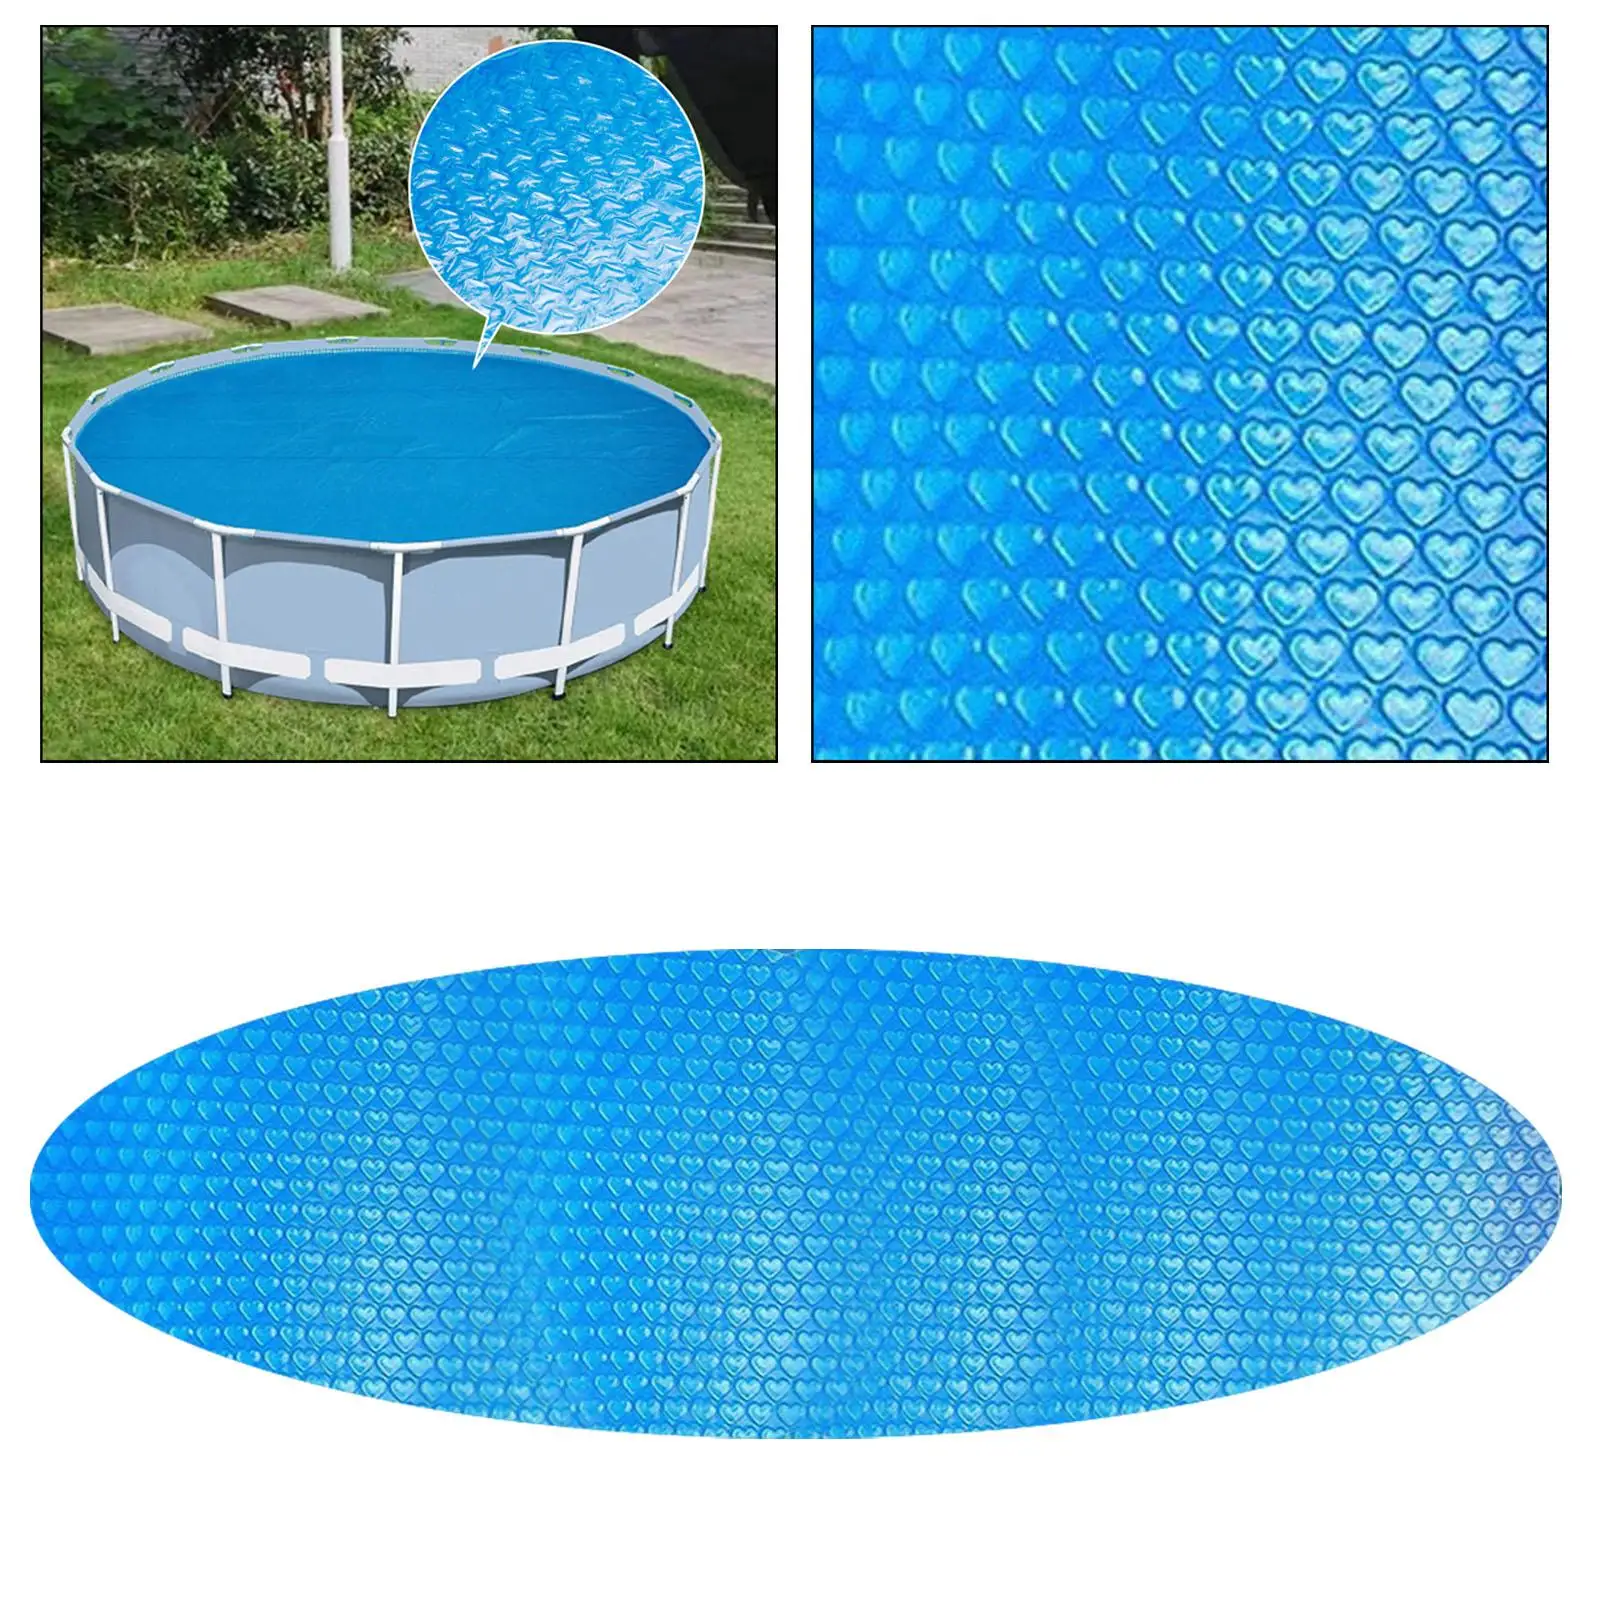 Swimming cover Round cover Waterproof Dustproof Mat Pool Cloth for Garden Outdoor Pool Paddling Inflatable Pool